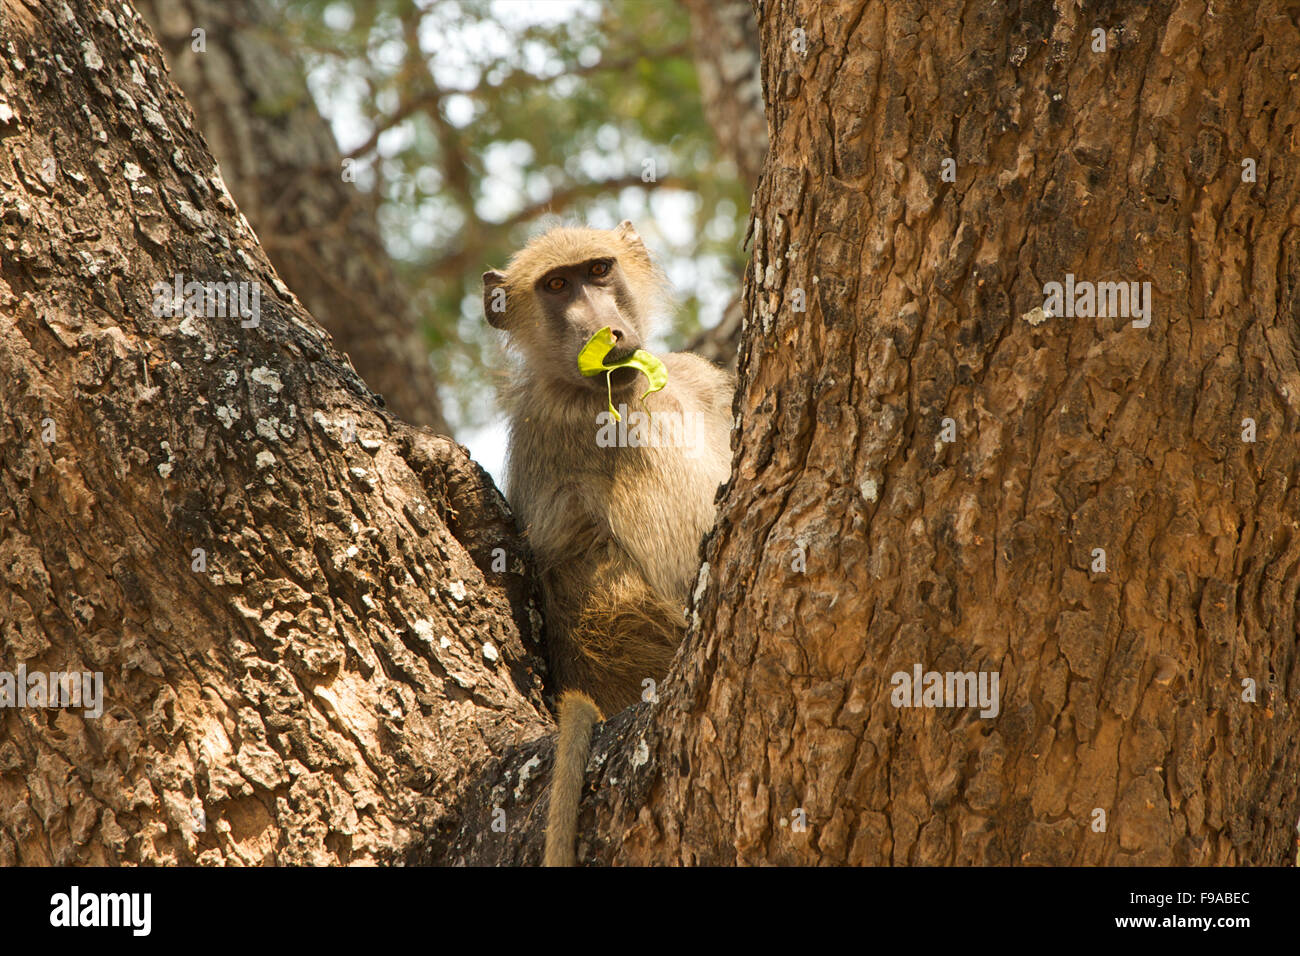 A baboon sitting in a tree chewing on leaves, Mana Pools Zimbabwe Stock Photo